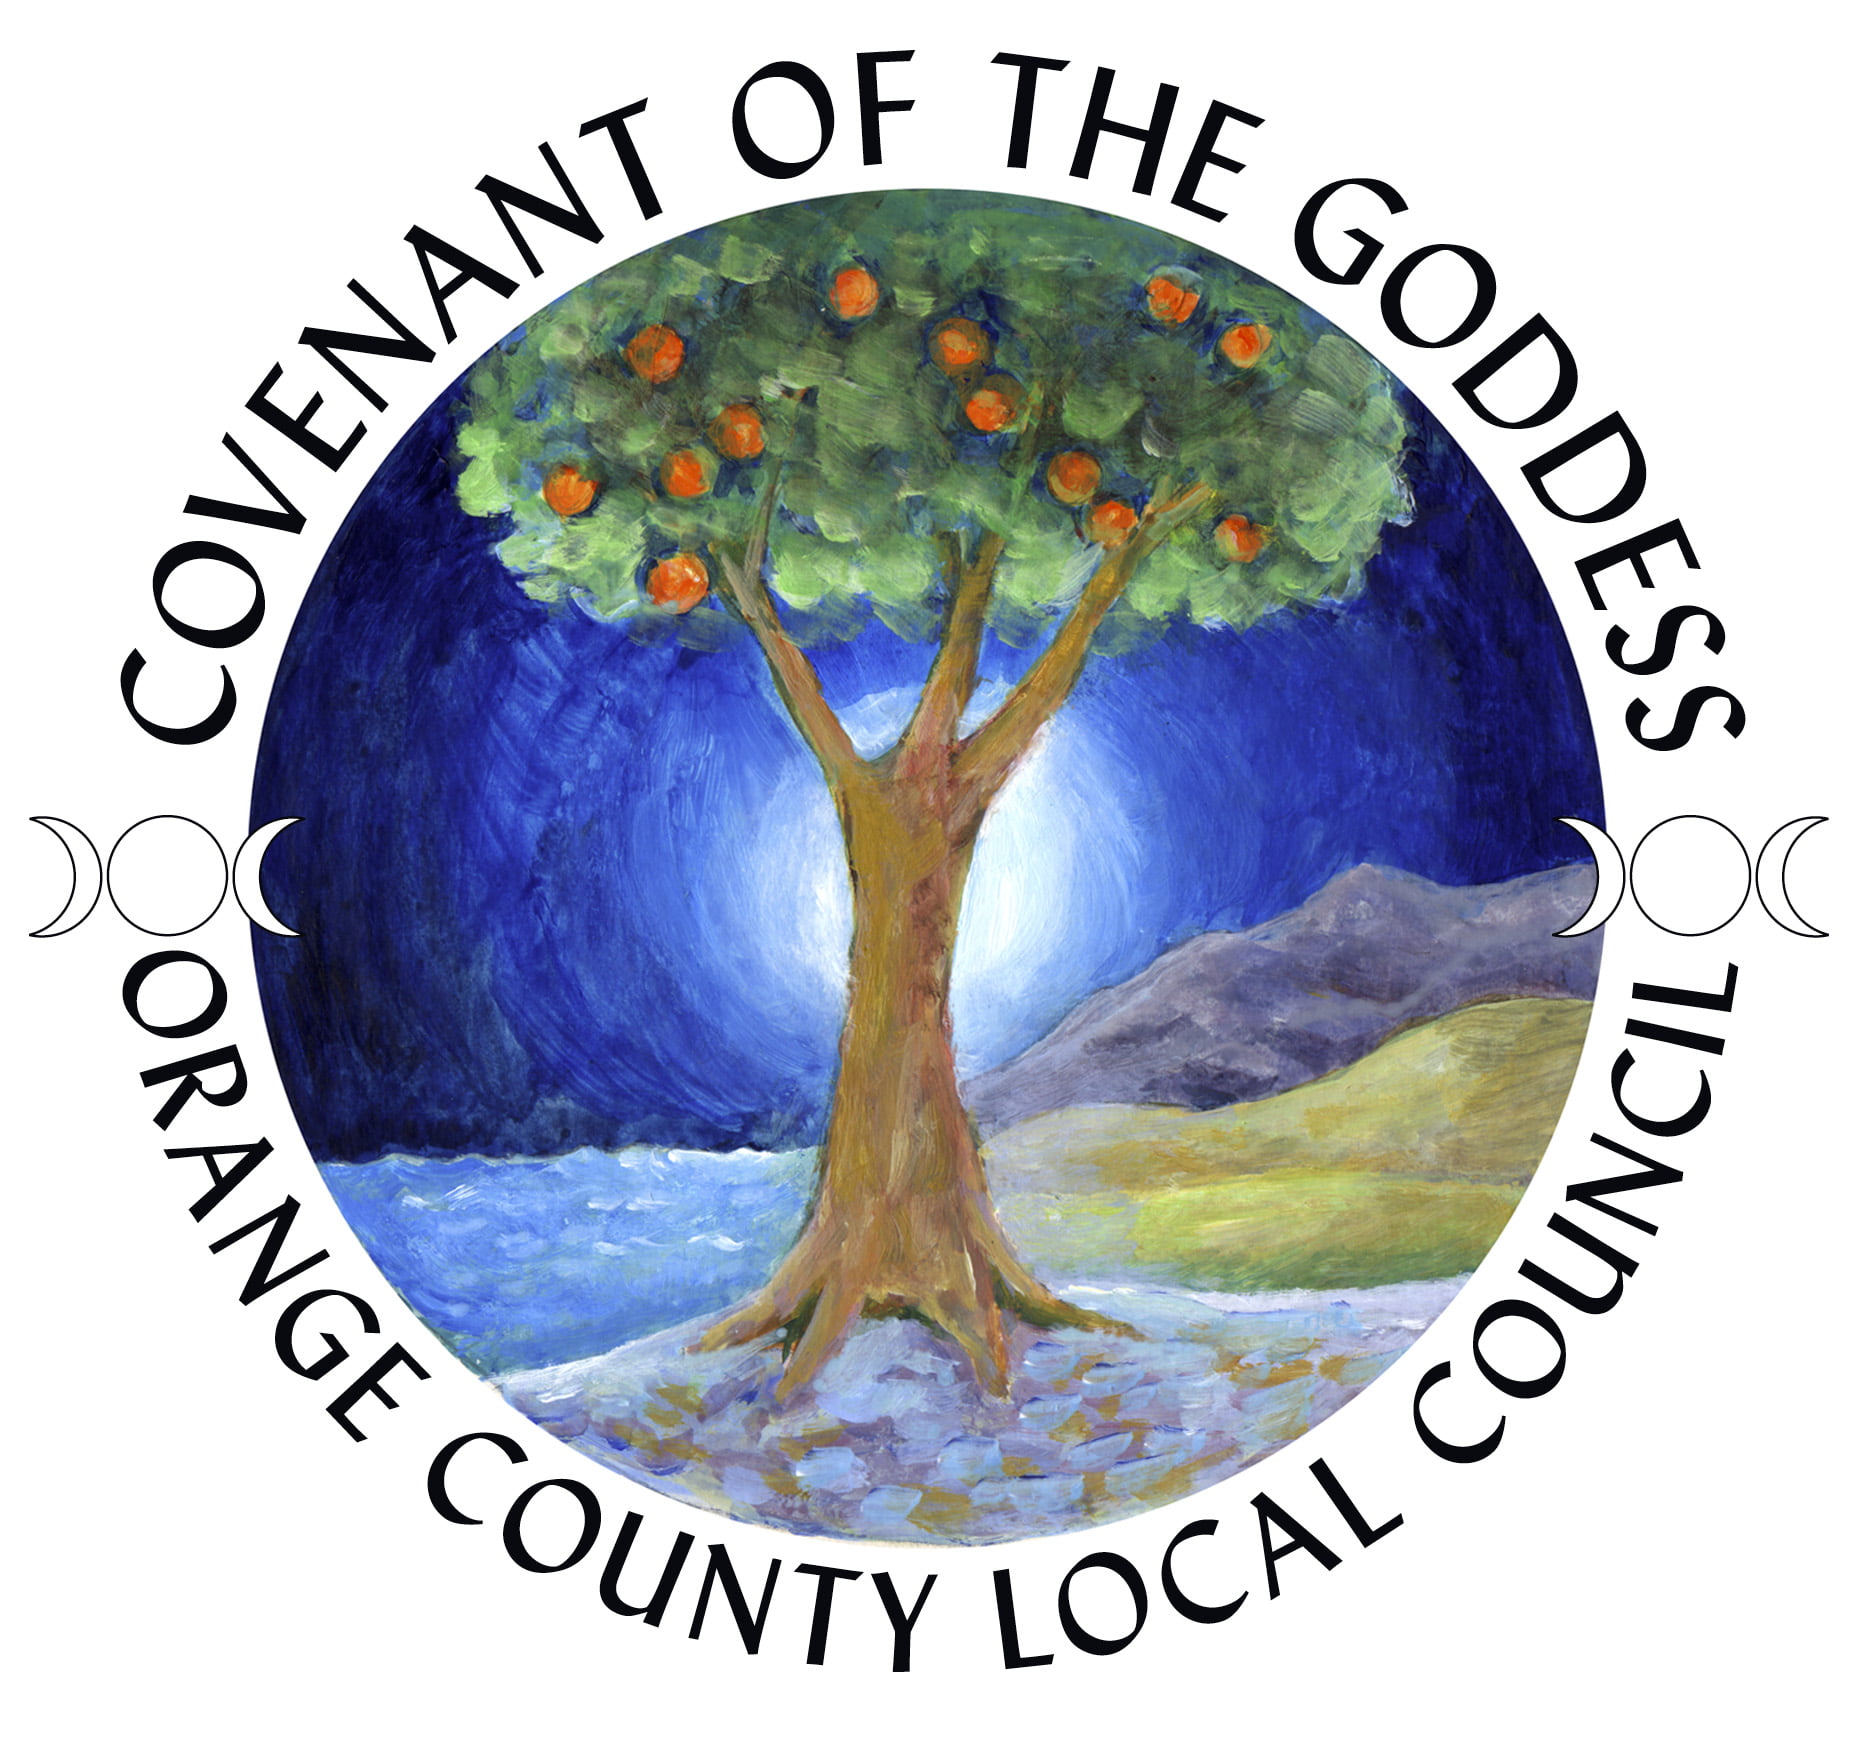 Orange County Local Council of Covenant of the Goddess